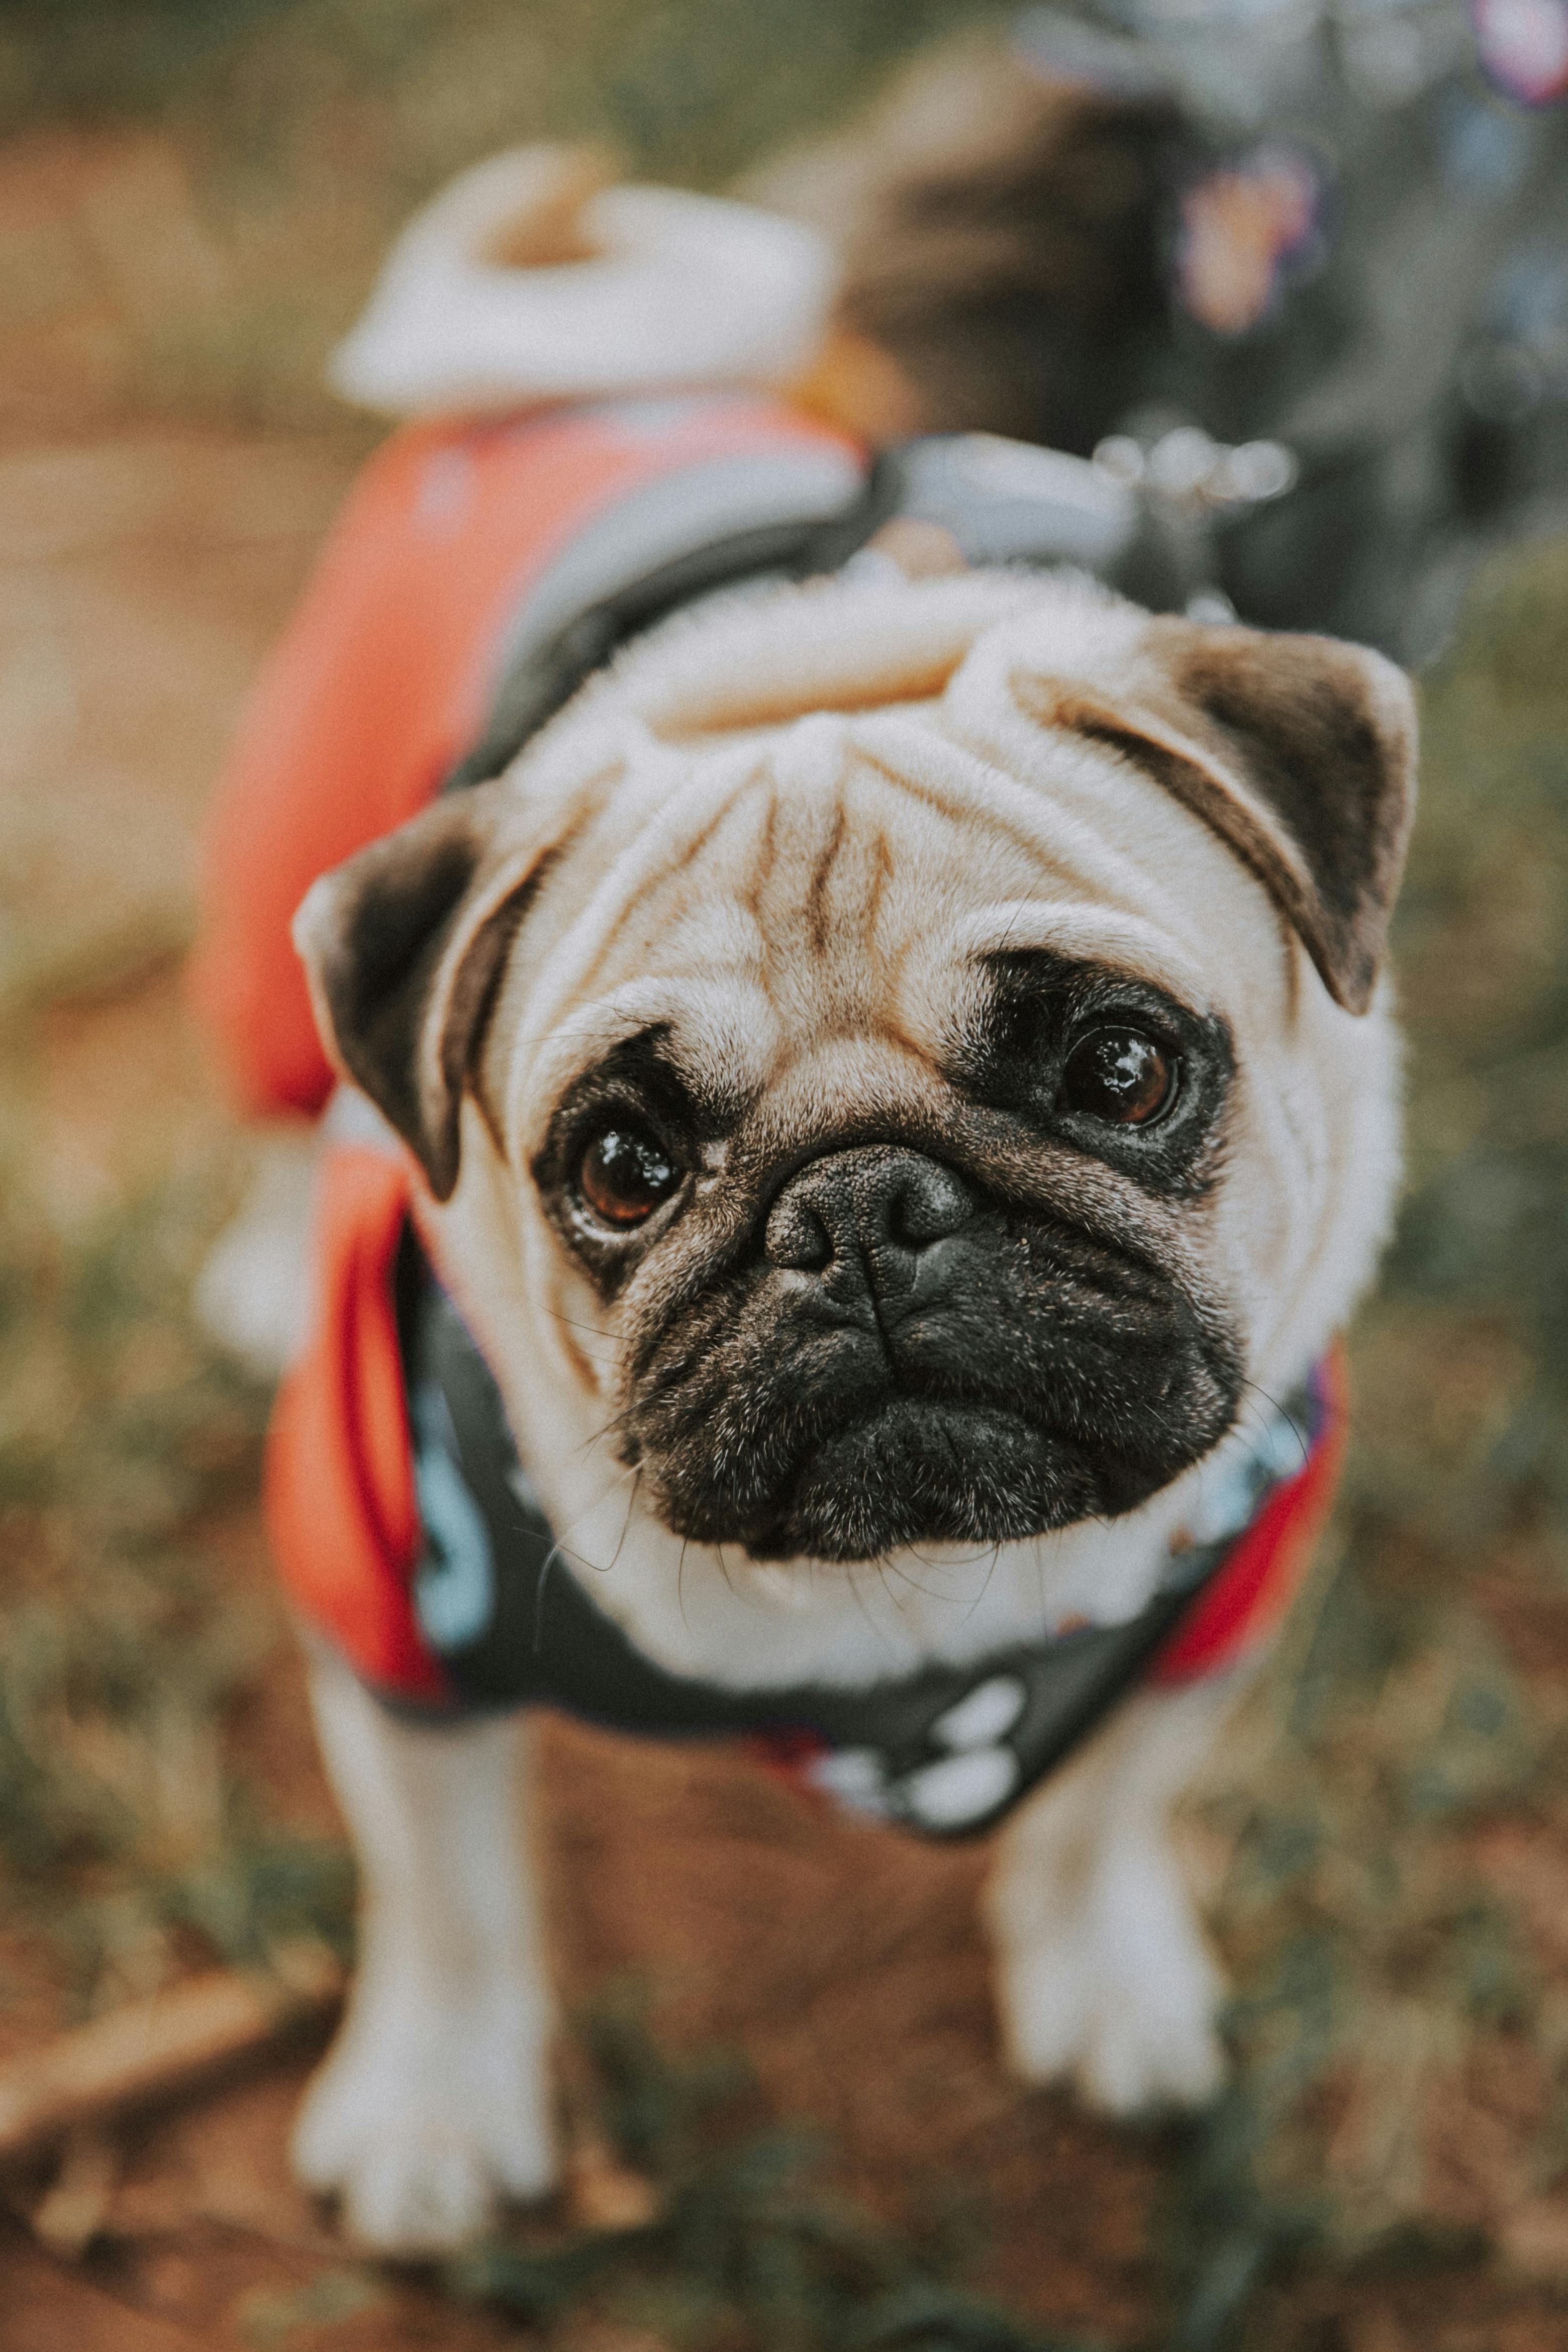  Pug Wallpapers  Cute Dog Wallpaper APK for Android Download